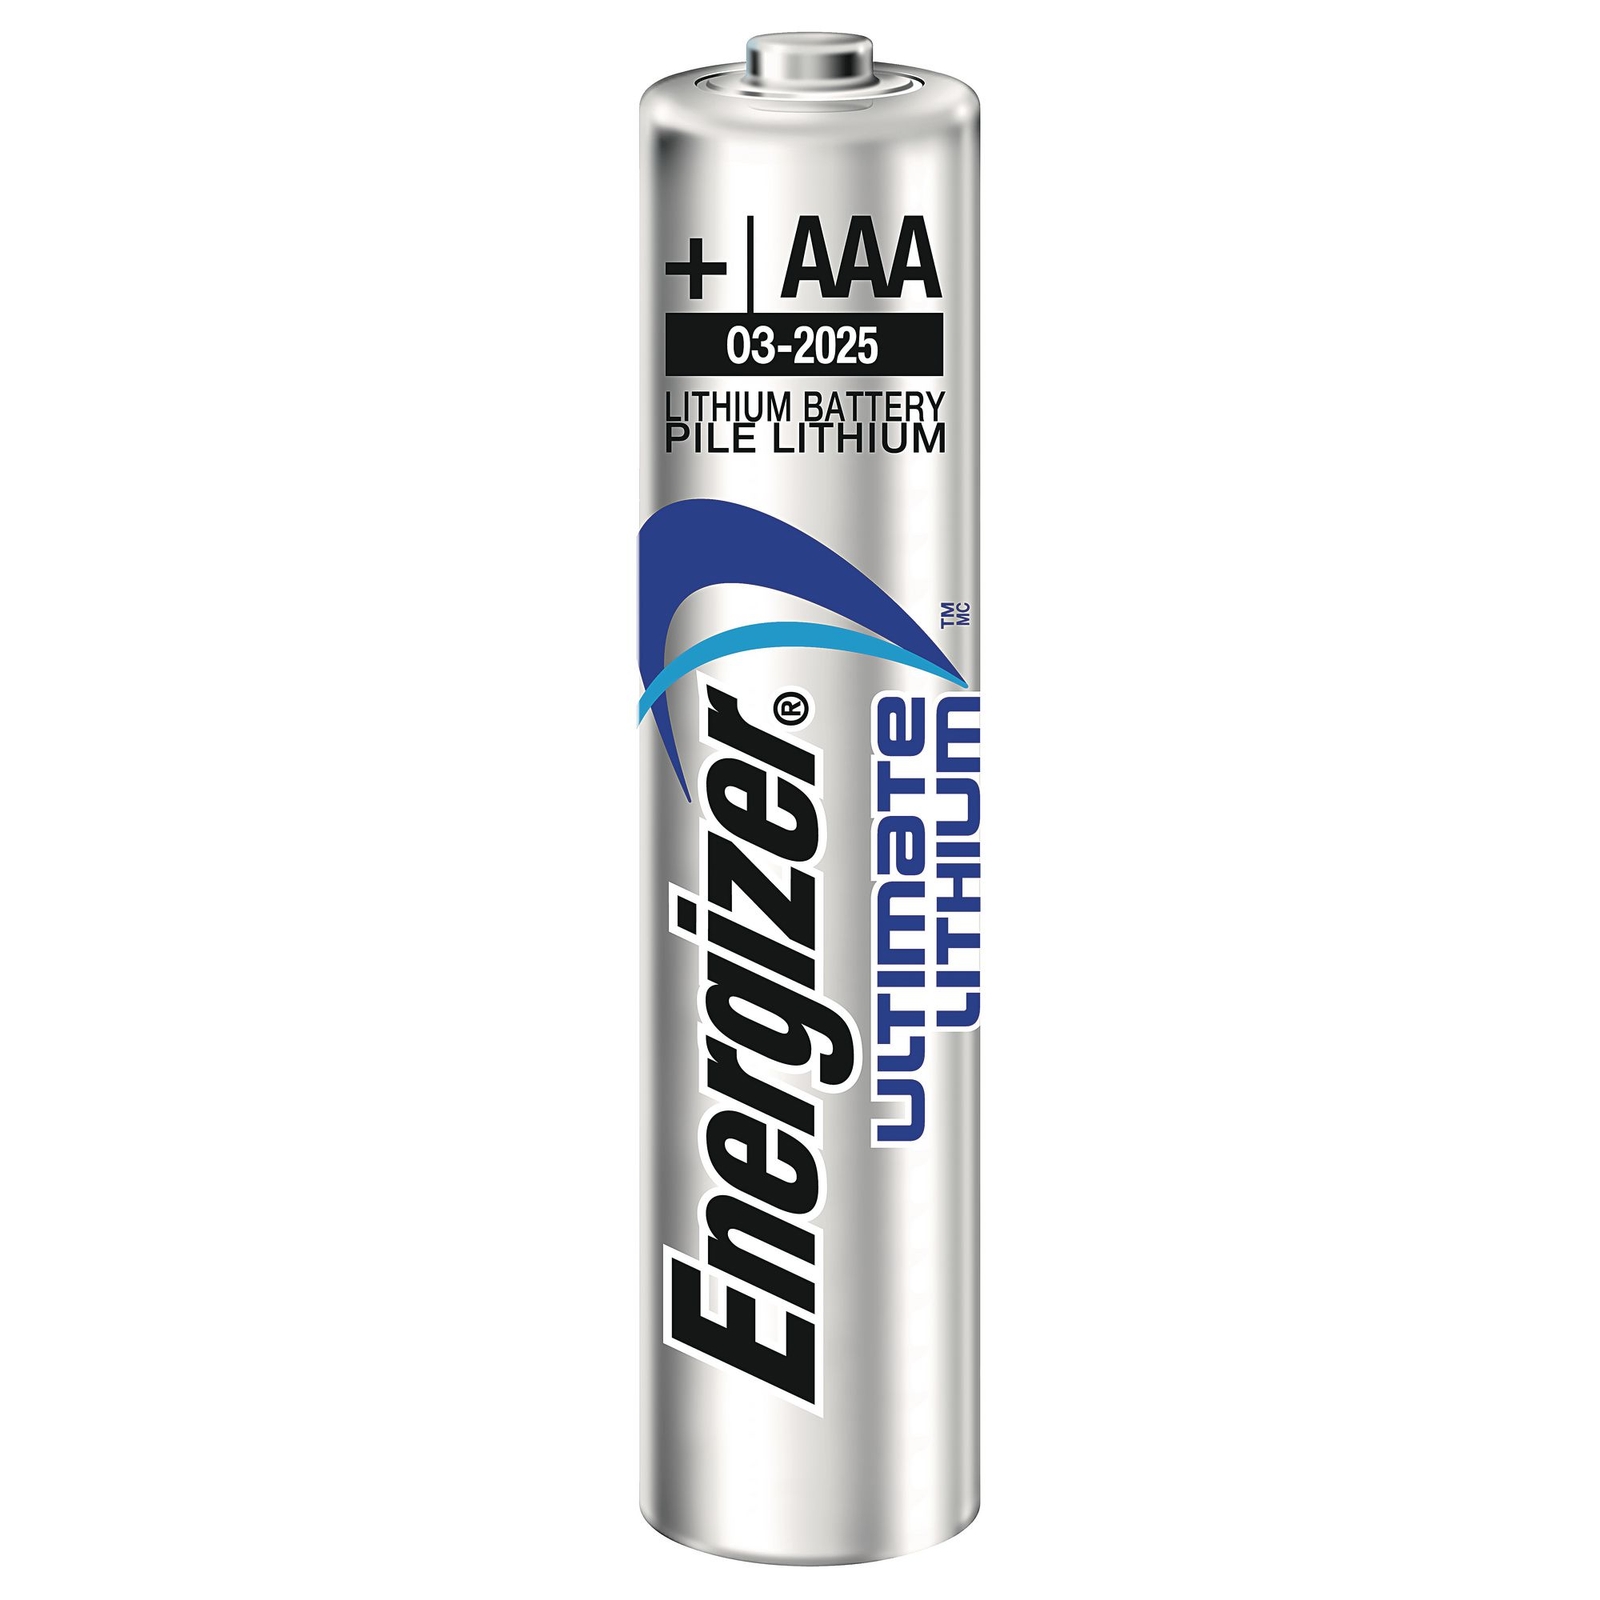 Energizer Lithium for Digital Cameras - AAA, LR03